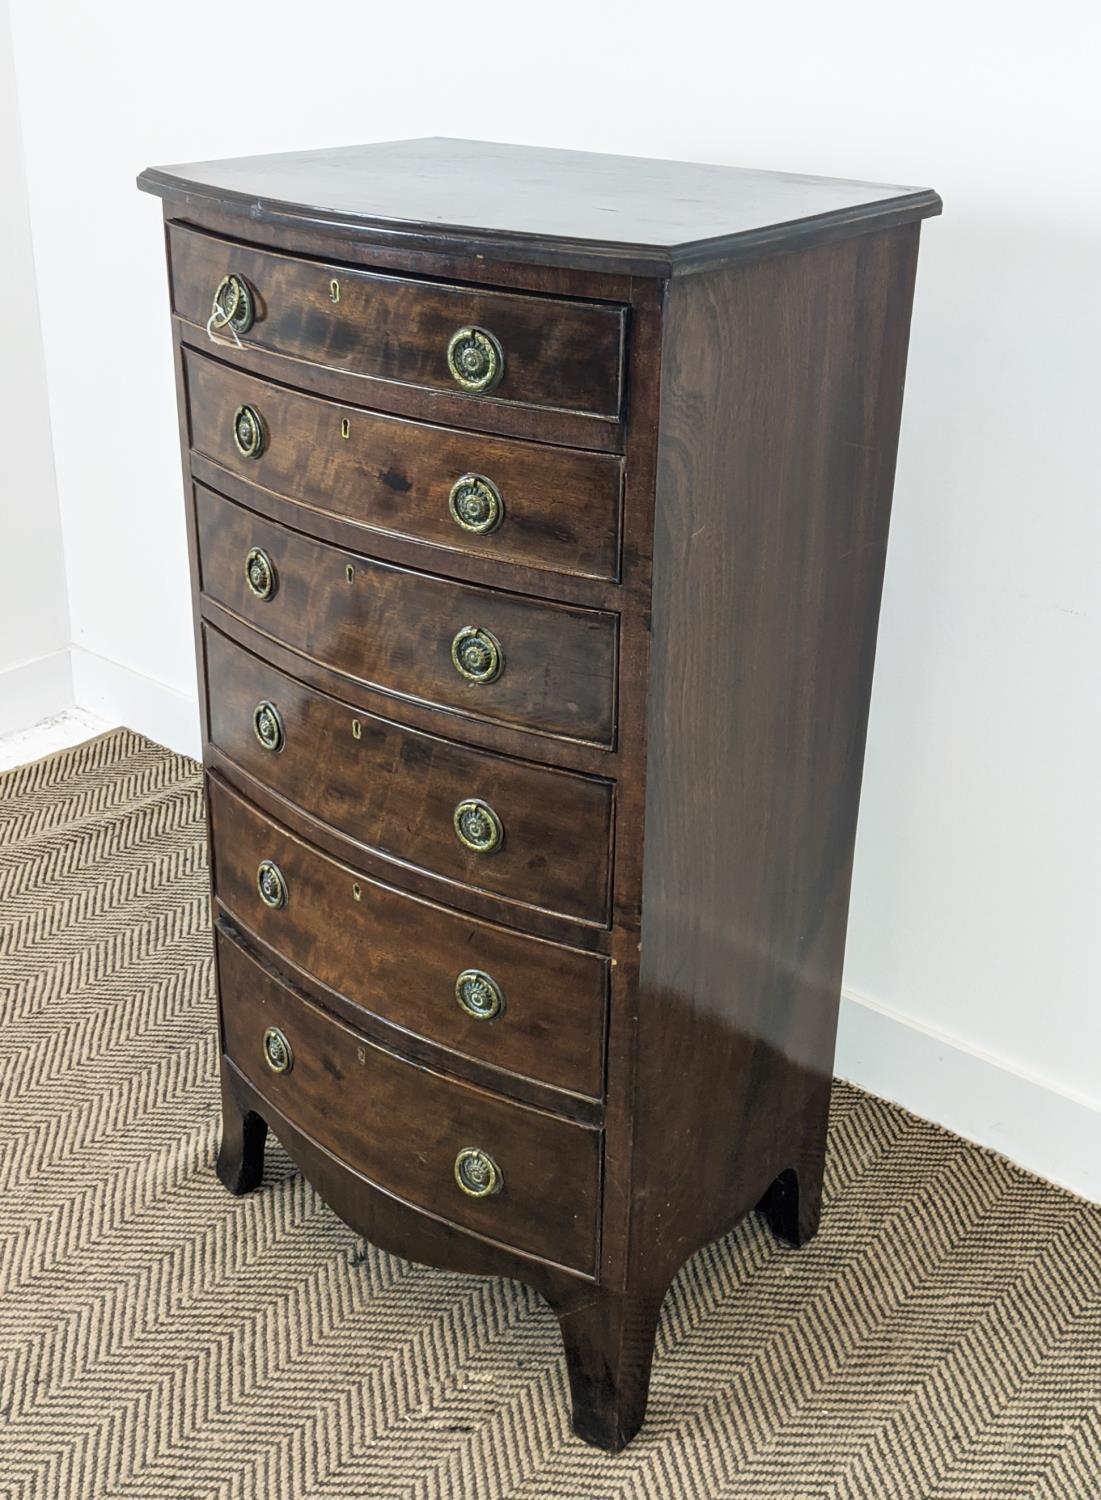 BOWFRONT NARROW CHEST, early 20th century Georgian revival mahogany with six drawers, 115cm H x 61cm - Image 3 of 10